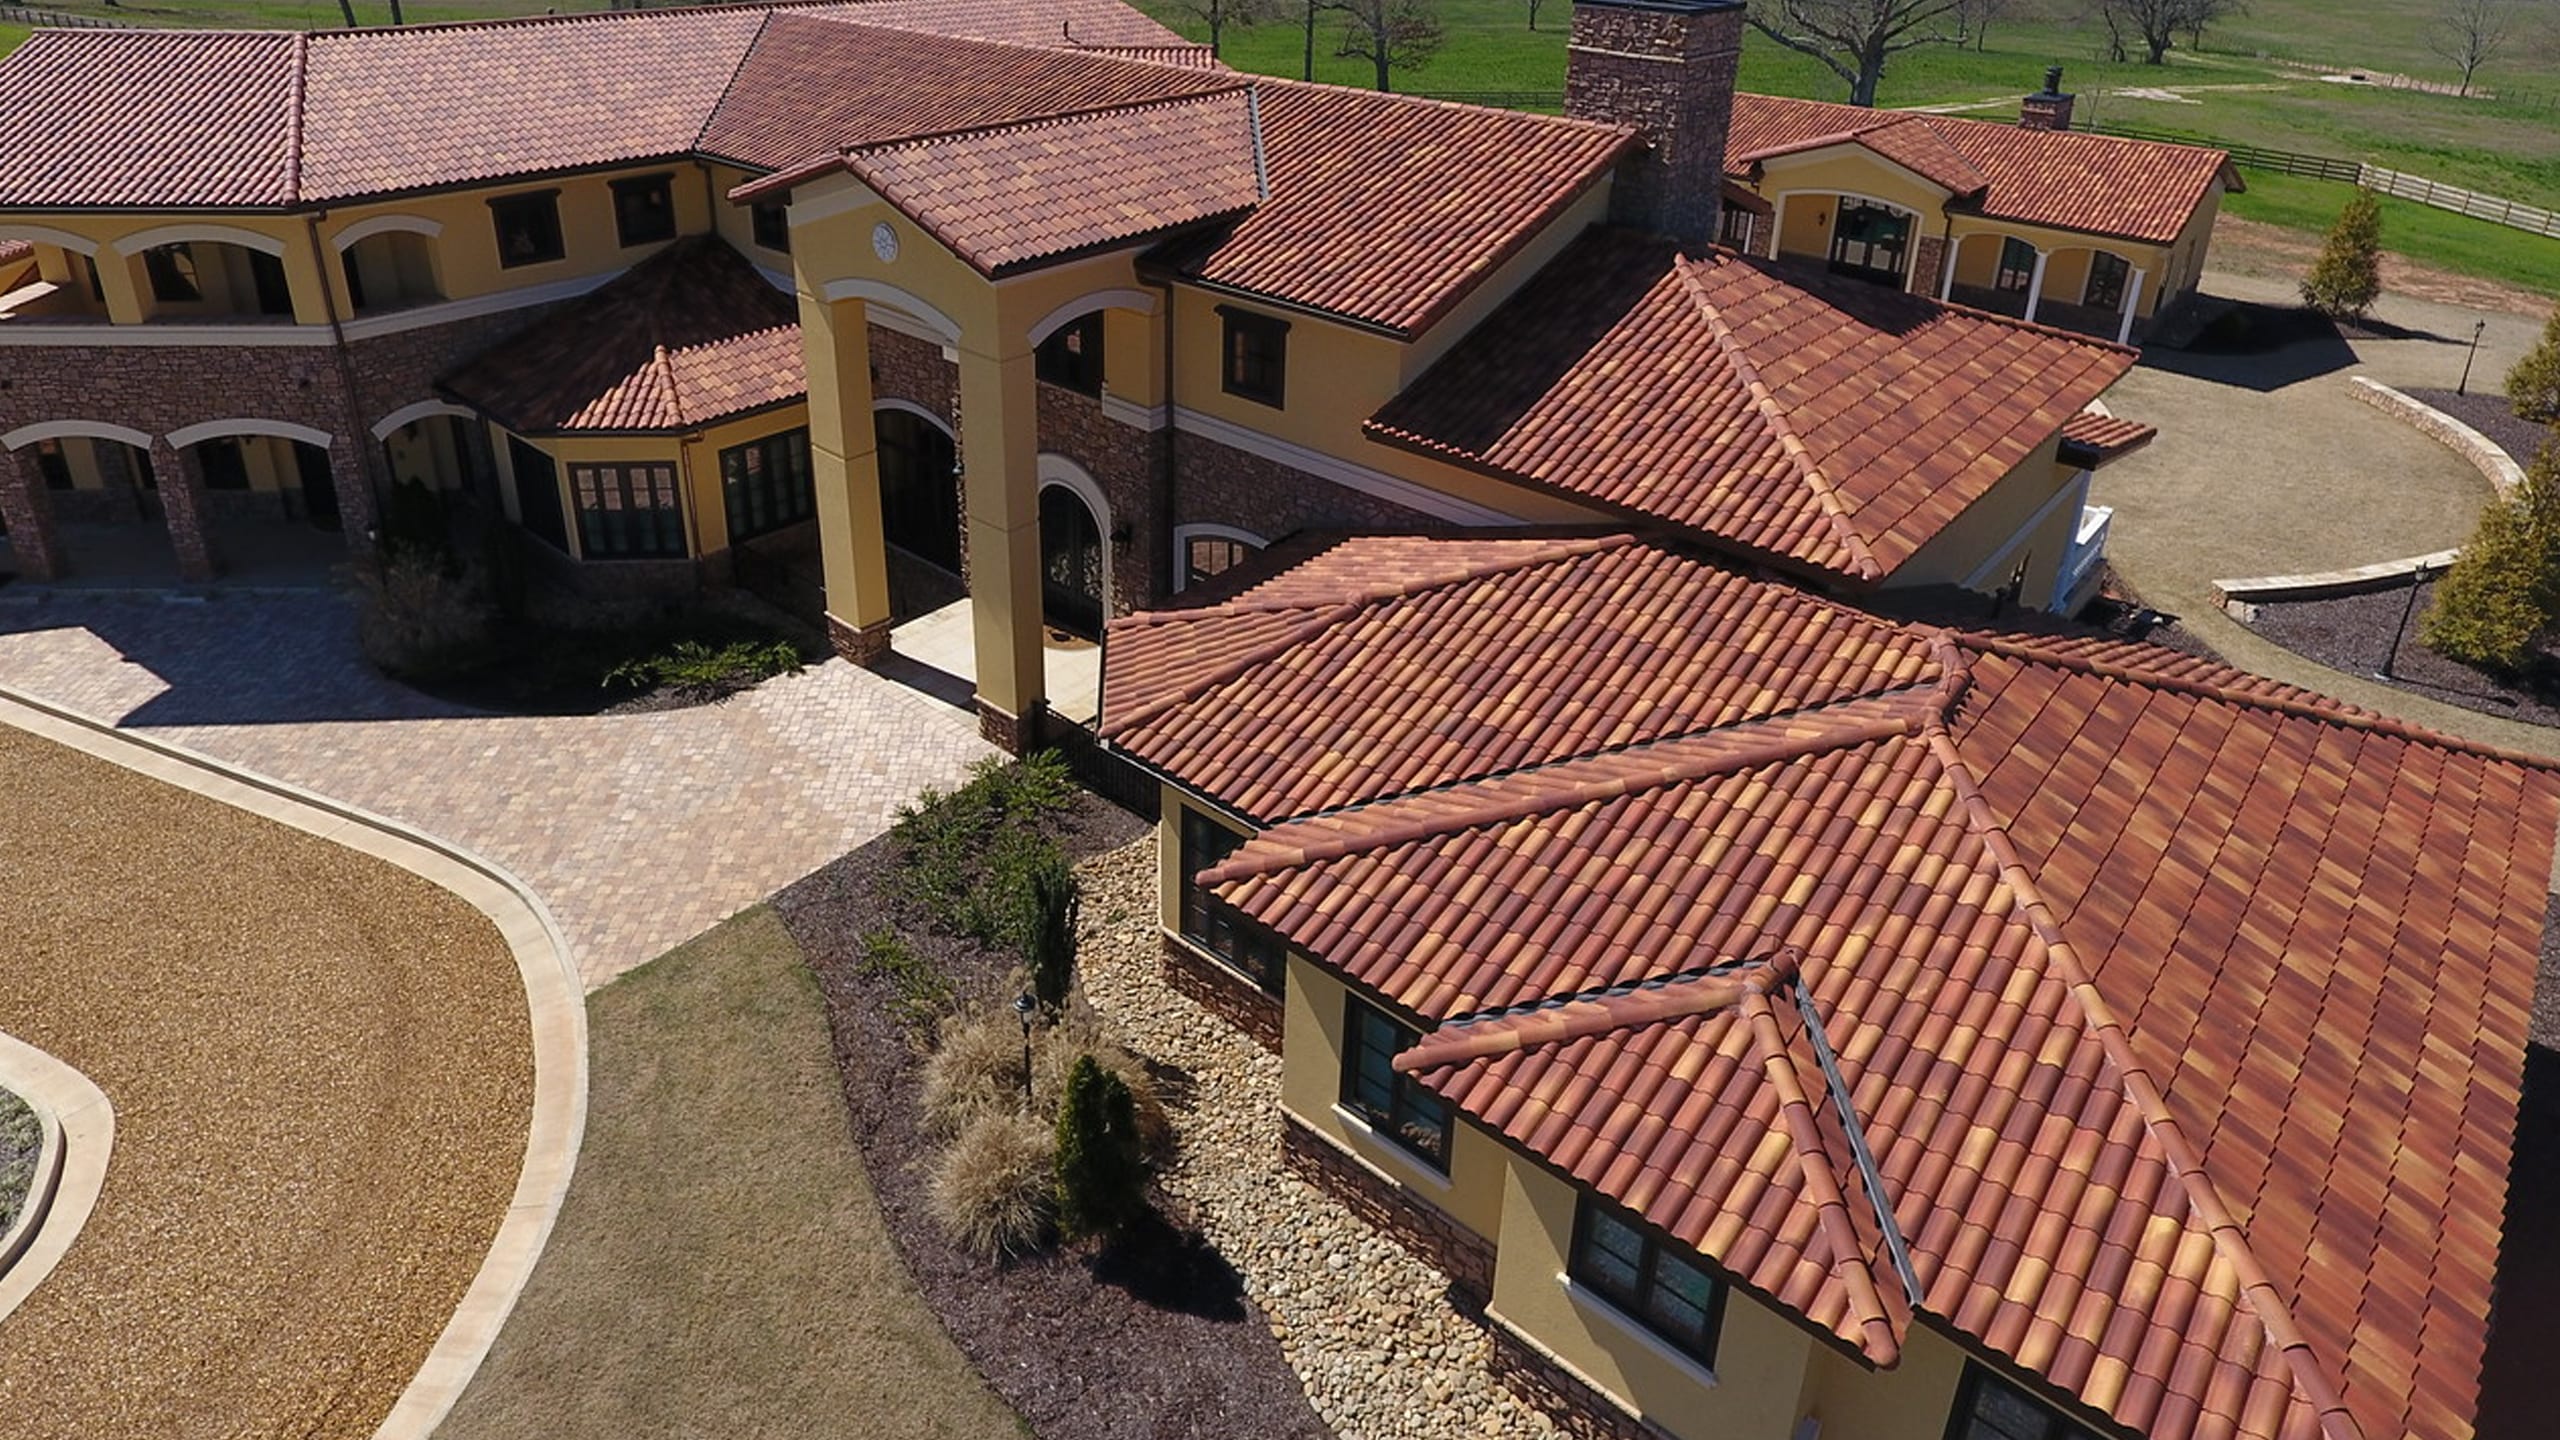 Private Residence in Newman Georgia Featuring Ludowici Spanish Clay Roof Tile